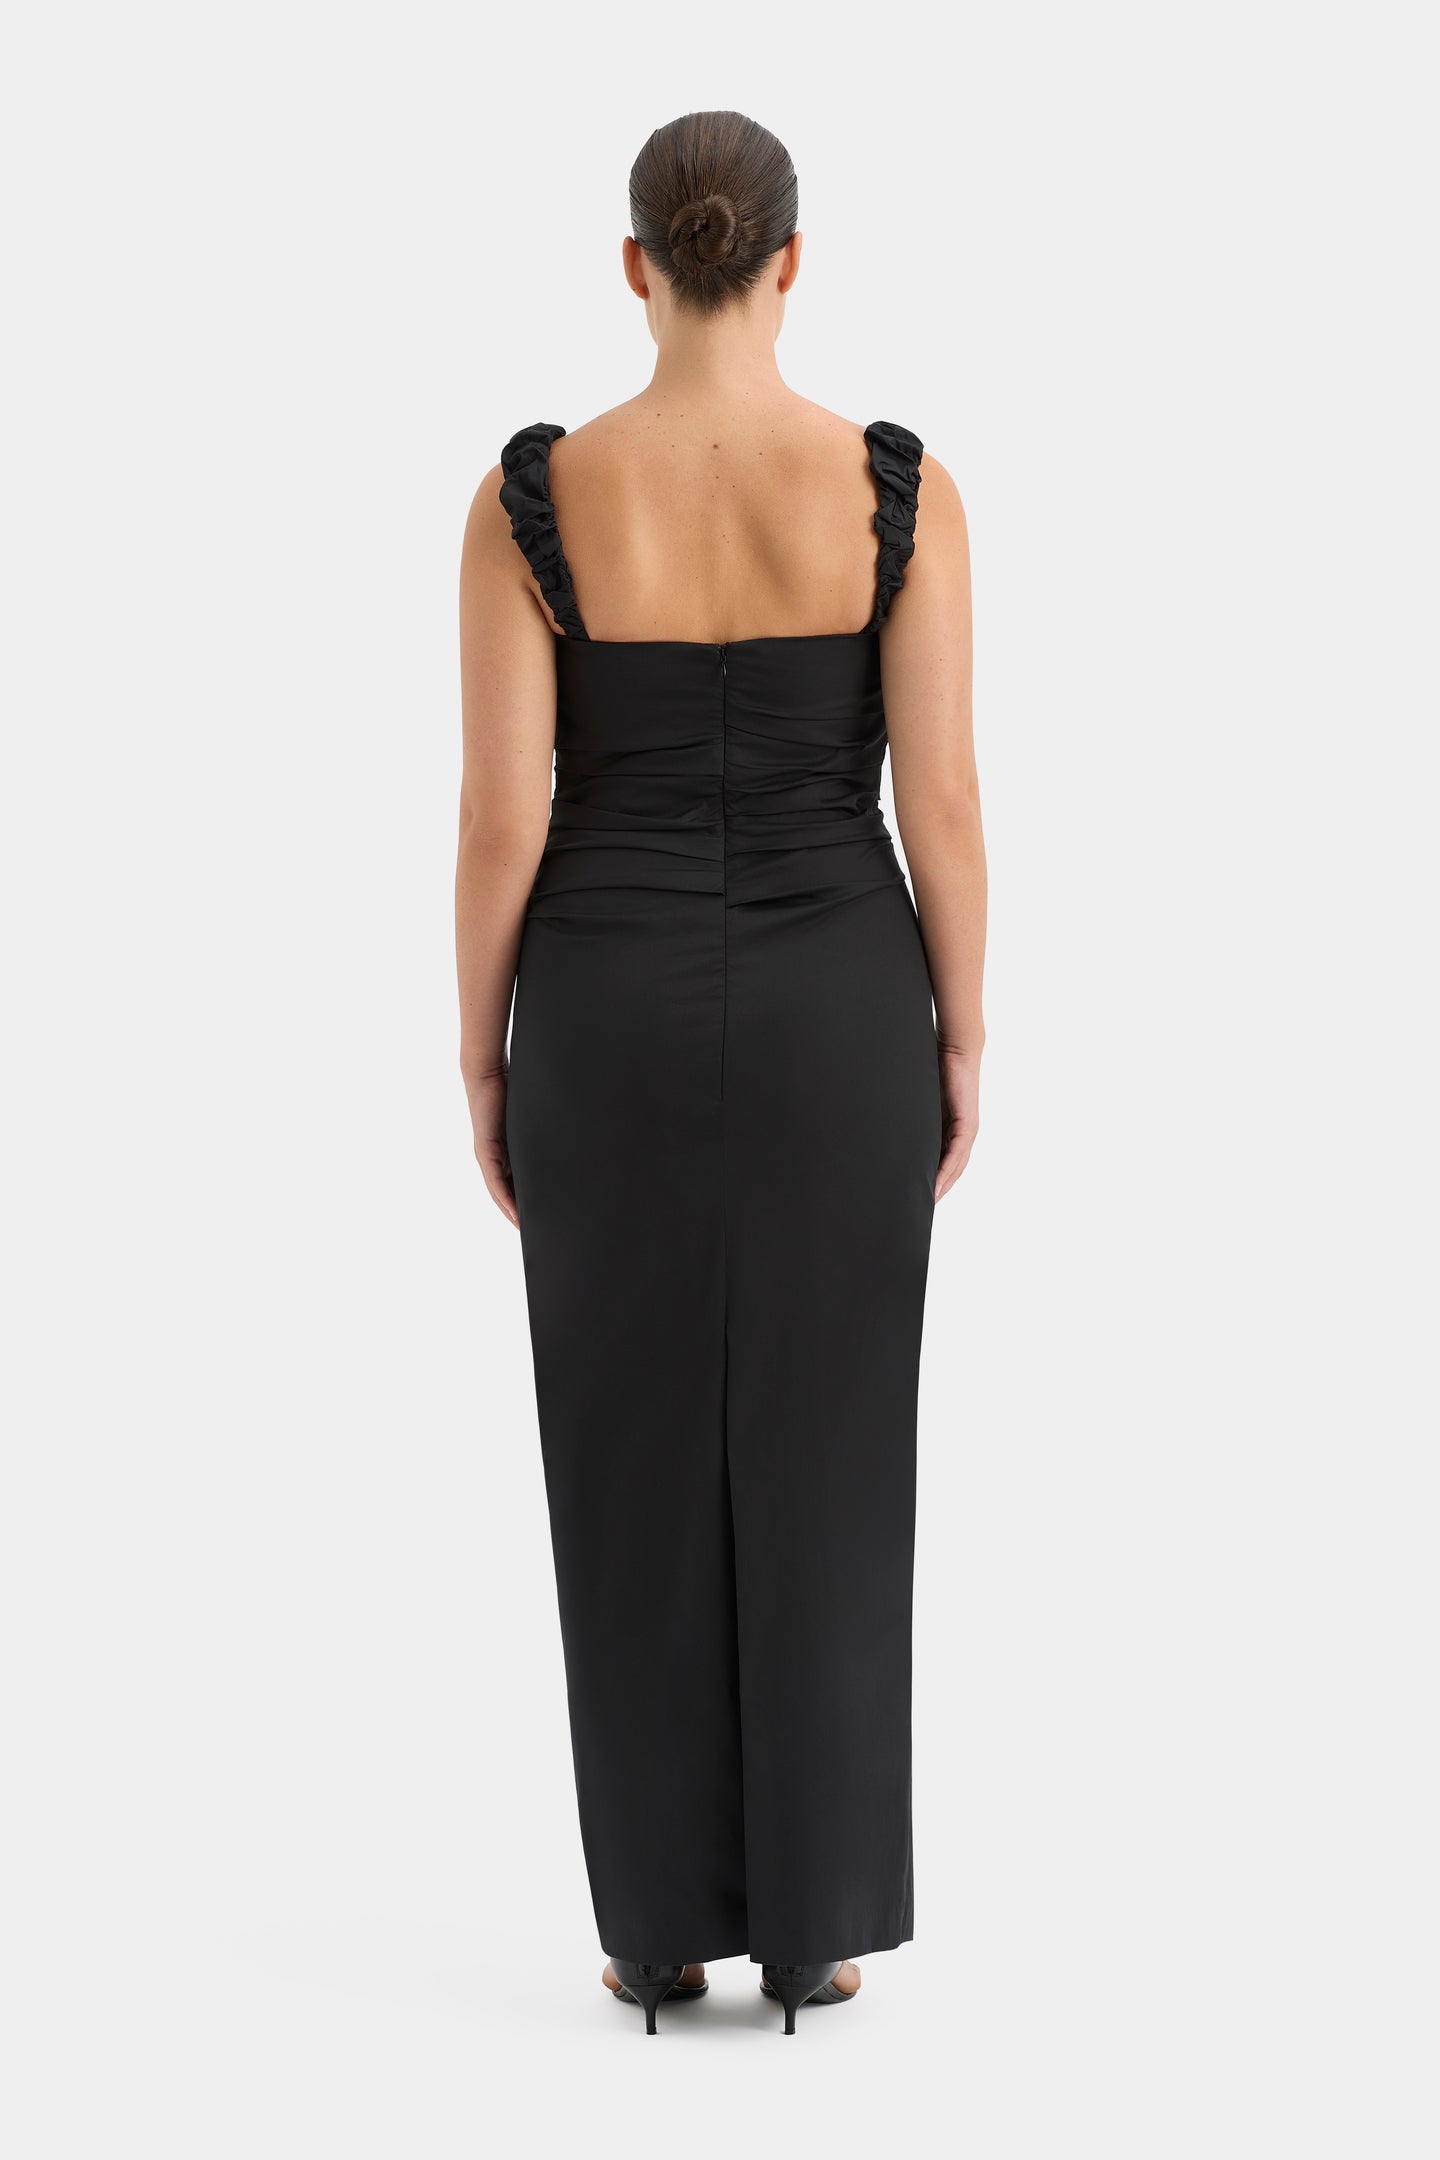 SIR the label Azul Balconette Gown BLACK